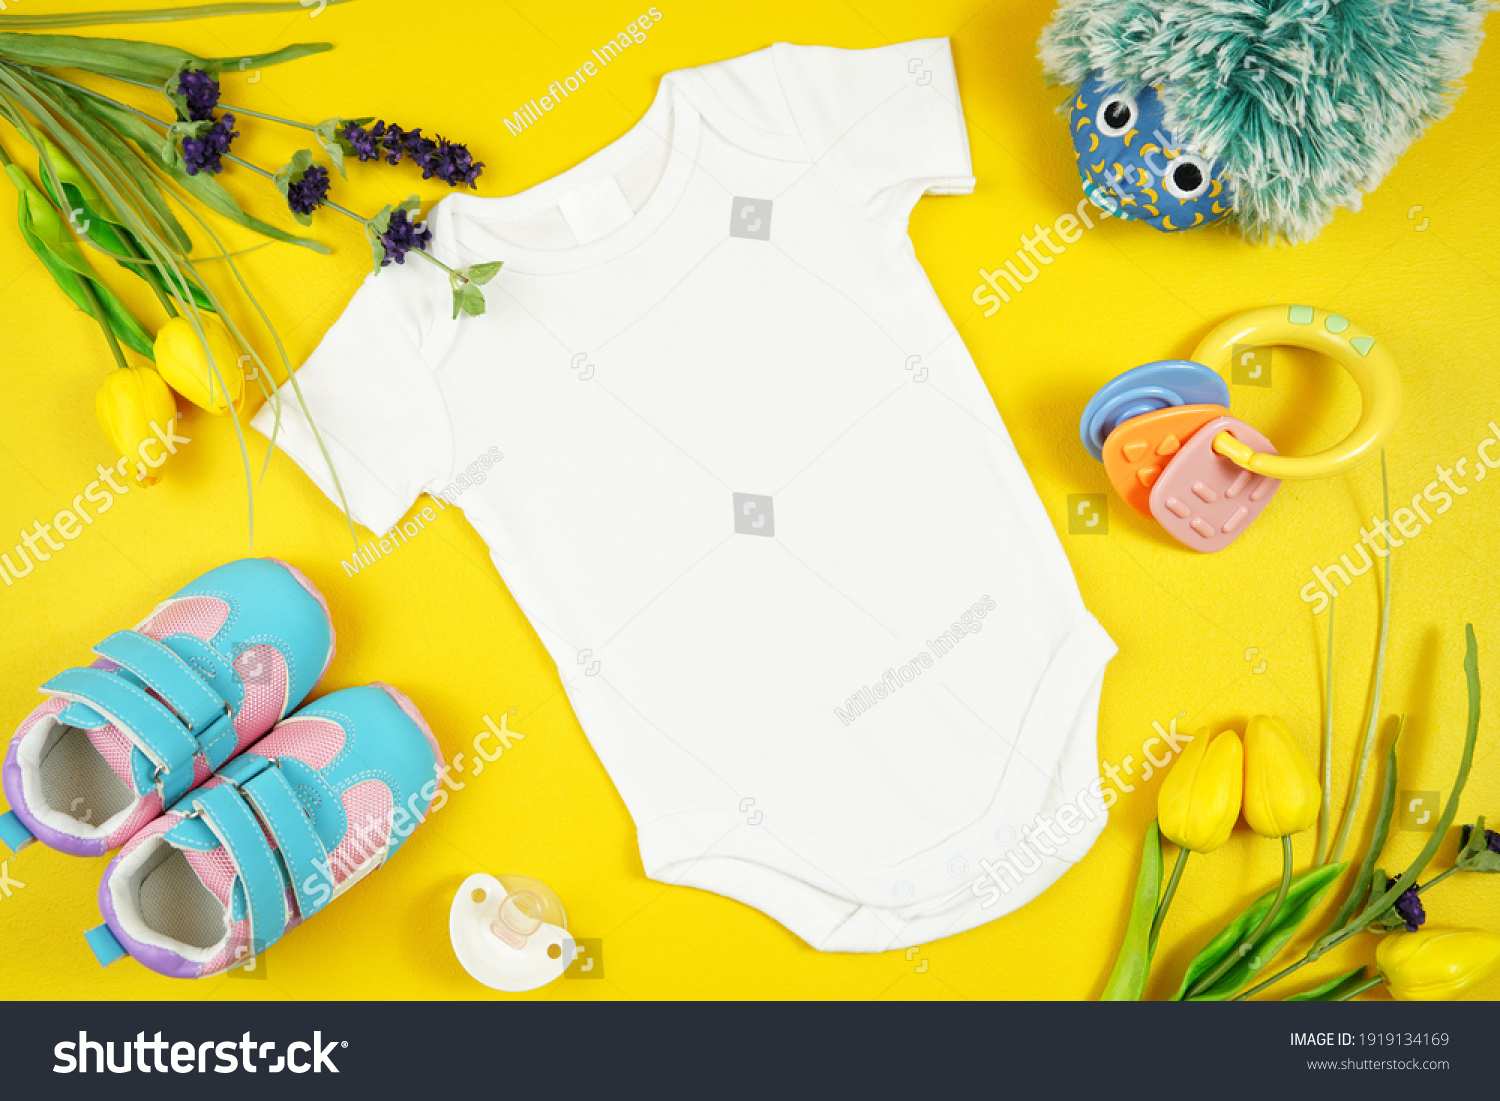 Springtime baby apparel flatlay on bright yellow table with colorful accessories. Mock up with negative copy space for your text or design here. #1919134169